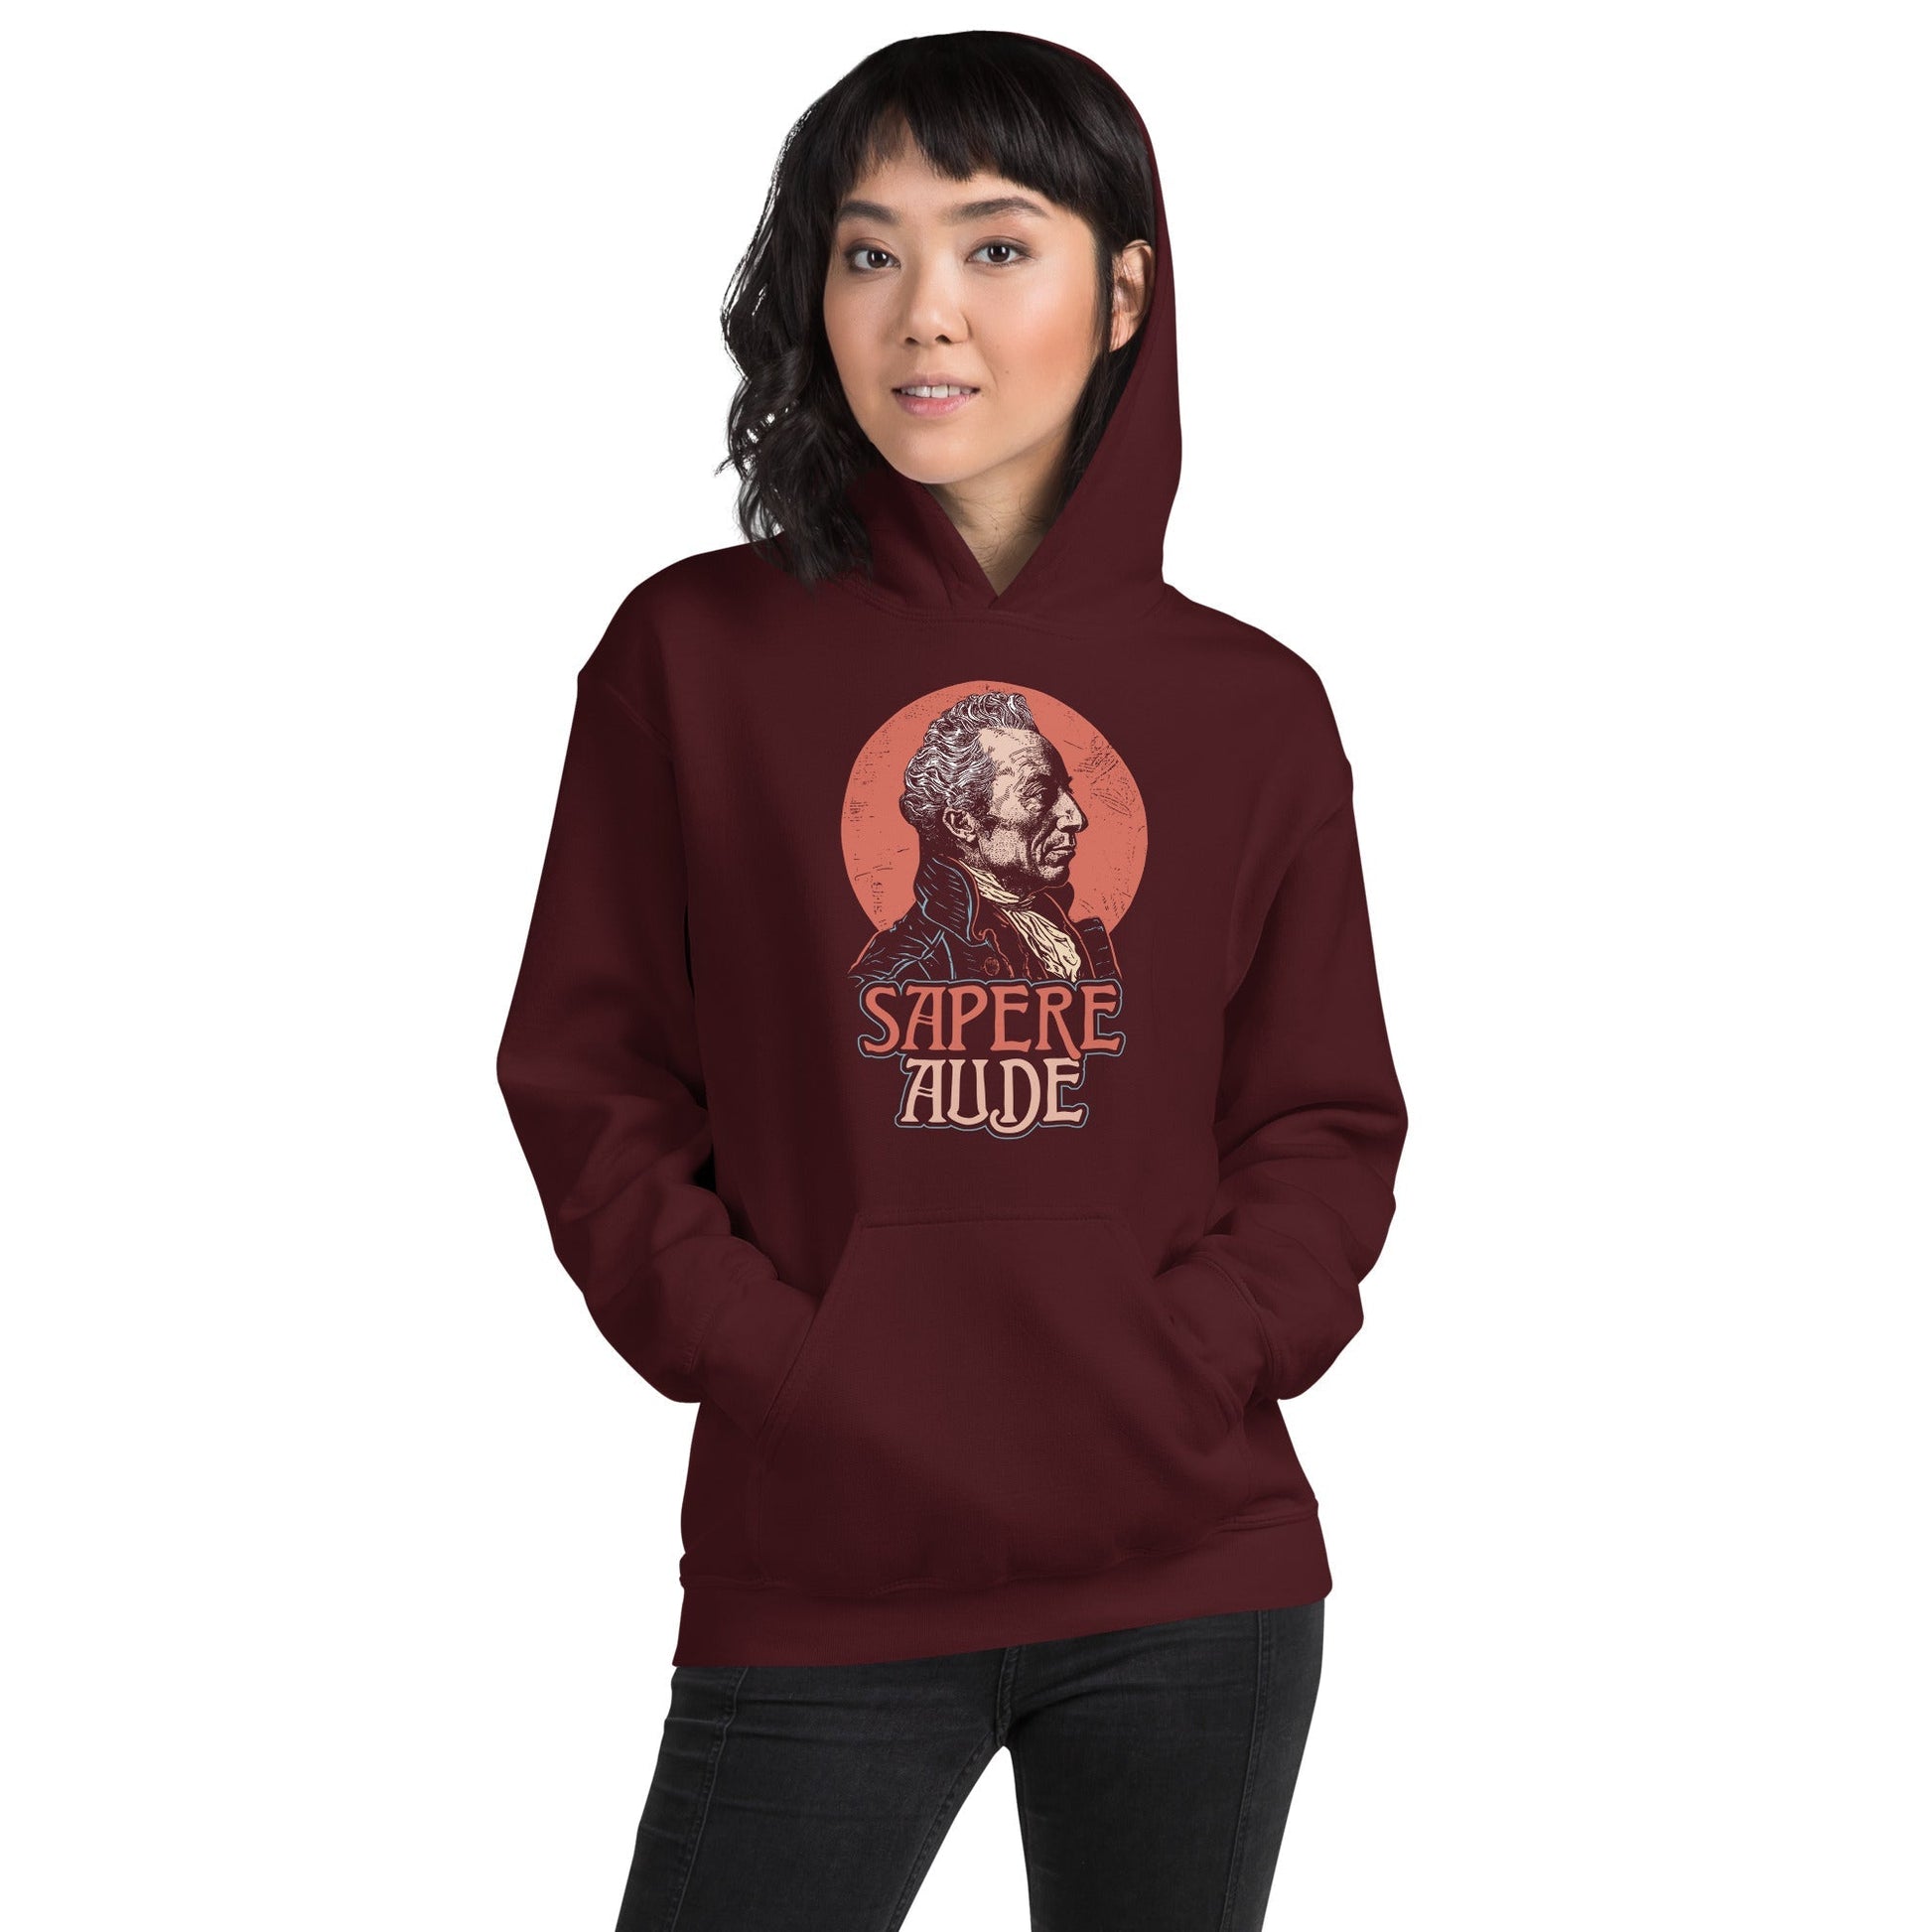 Immanuel Kant - Sapere Aude - Hoodie